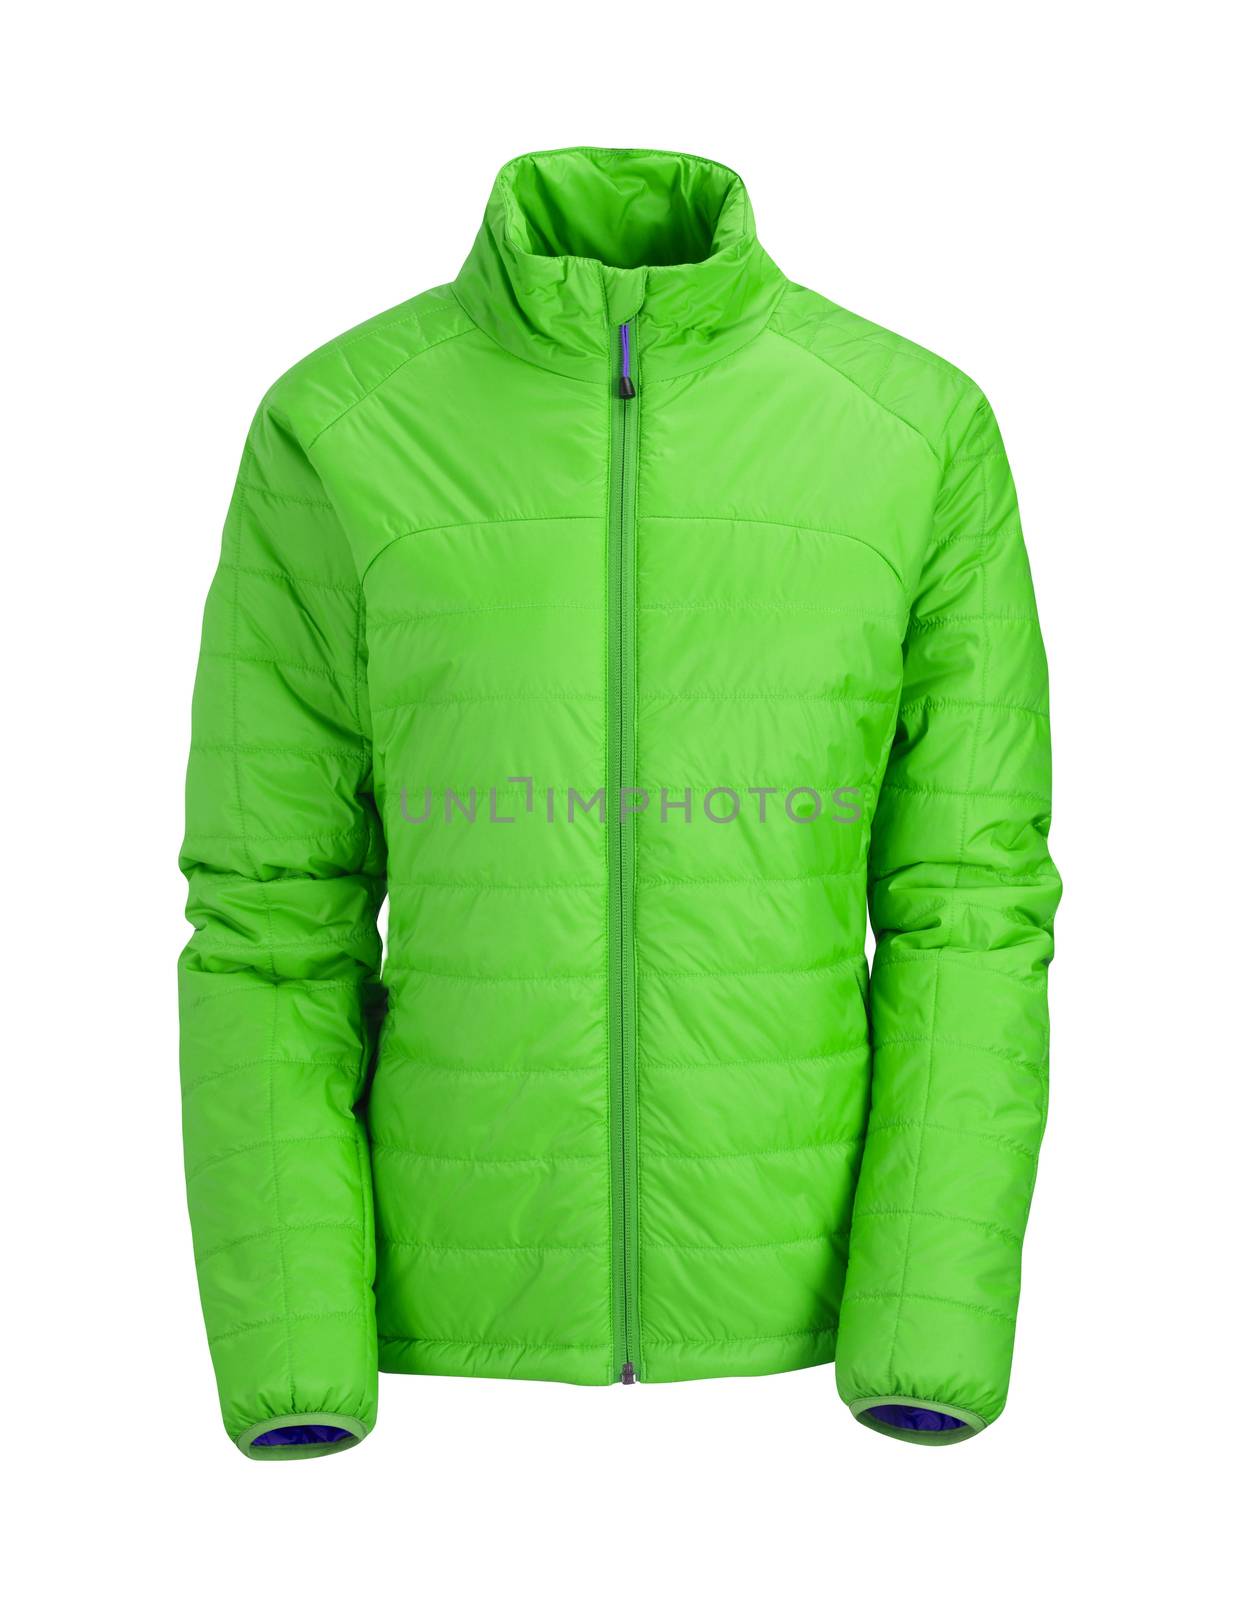 green jacket isolated on white by ozaiachin